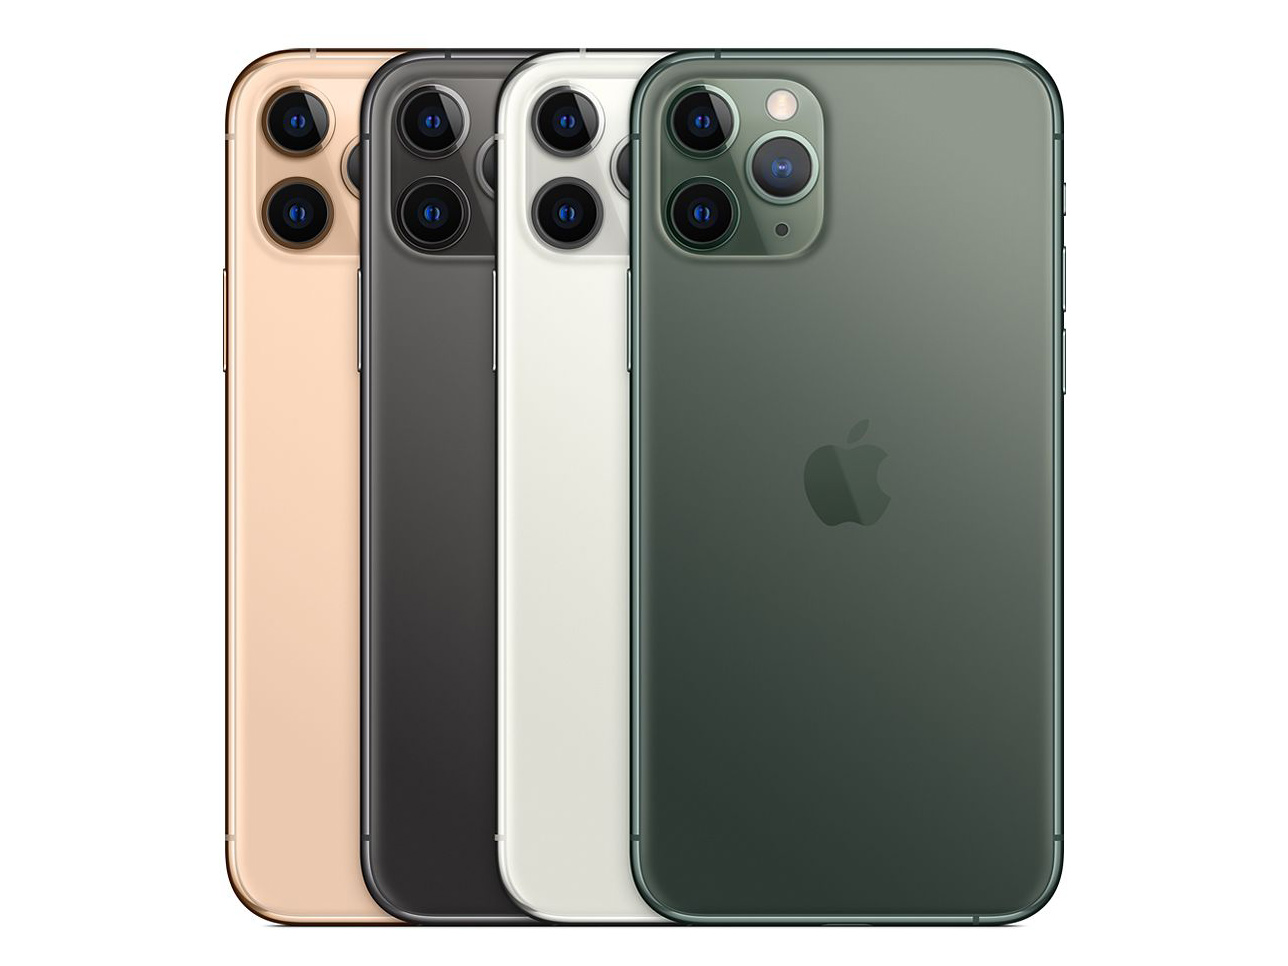 Iphone 11 Pro Max Review Photo Tips For Beginners